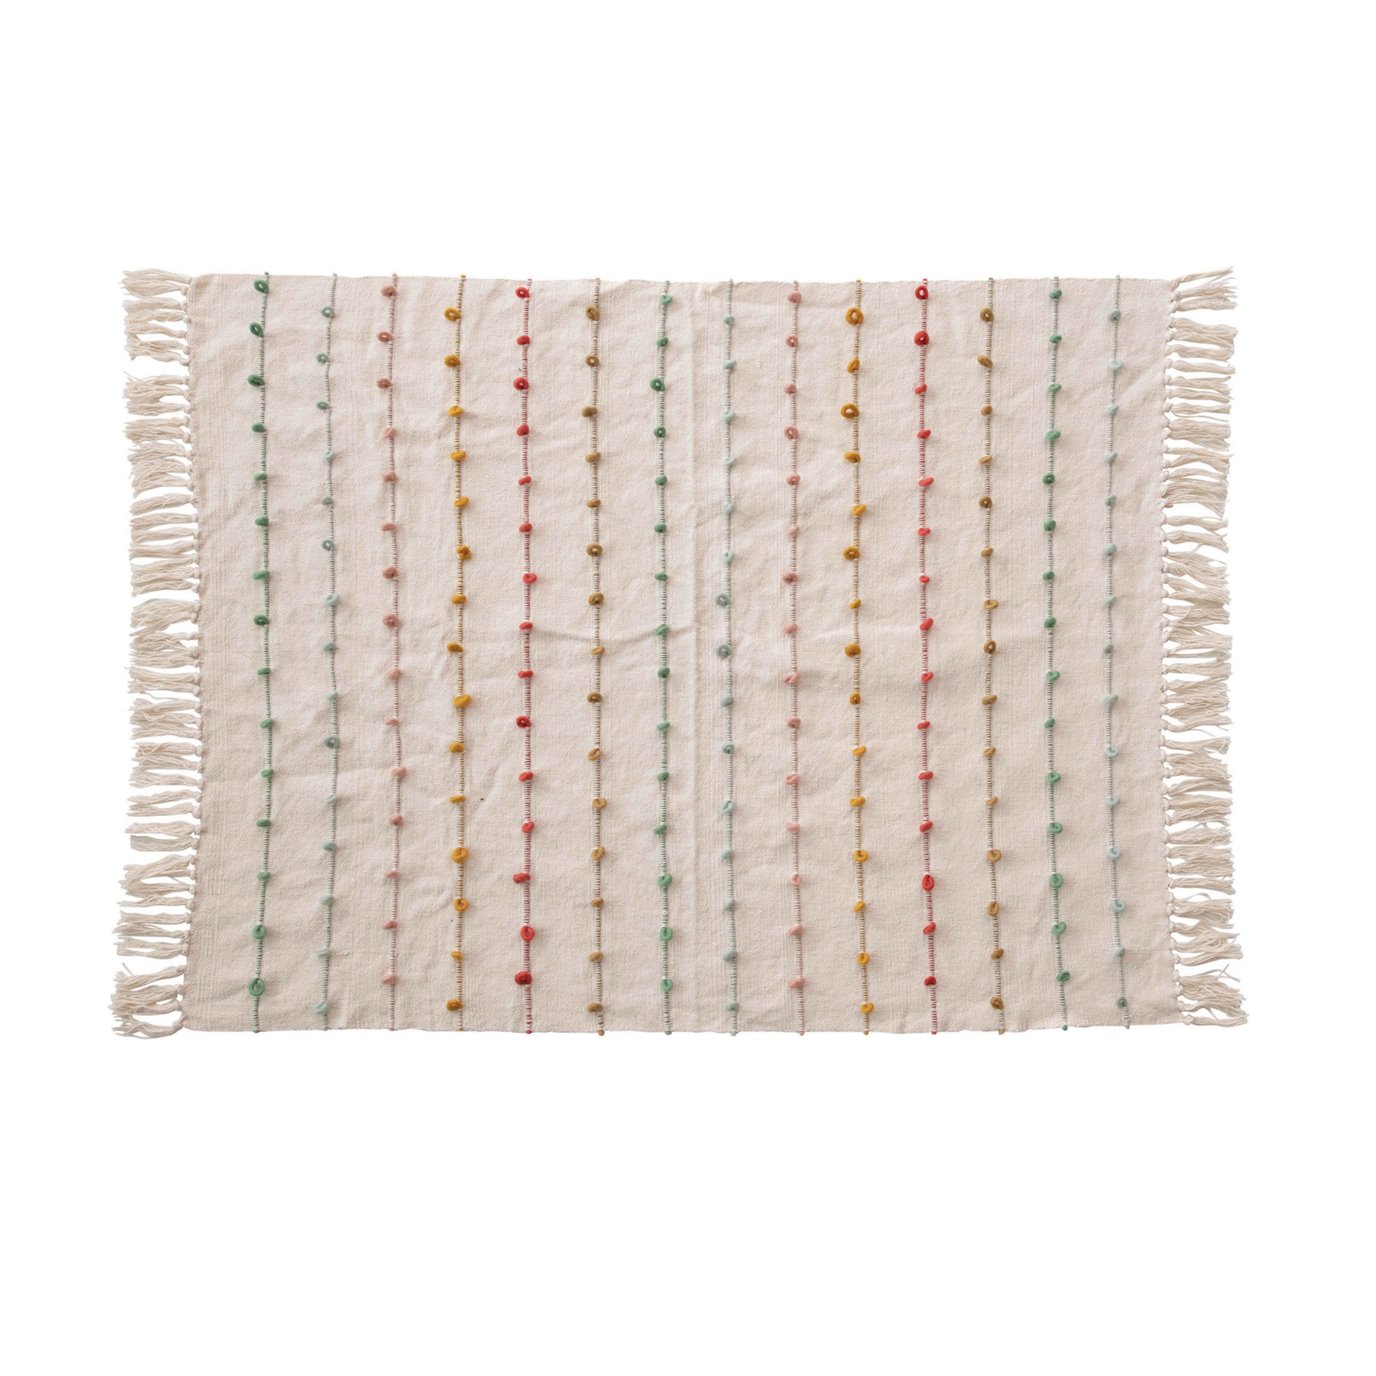 Cotton Knit Baby Blanket with Tassels & Multi Color Embroidery Loop